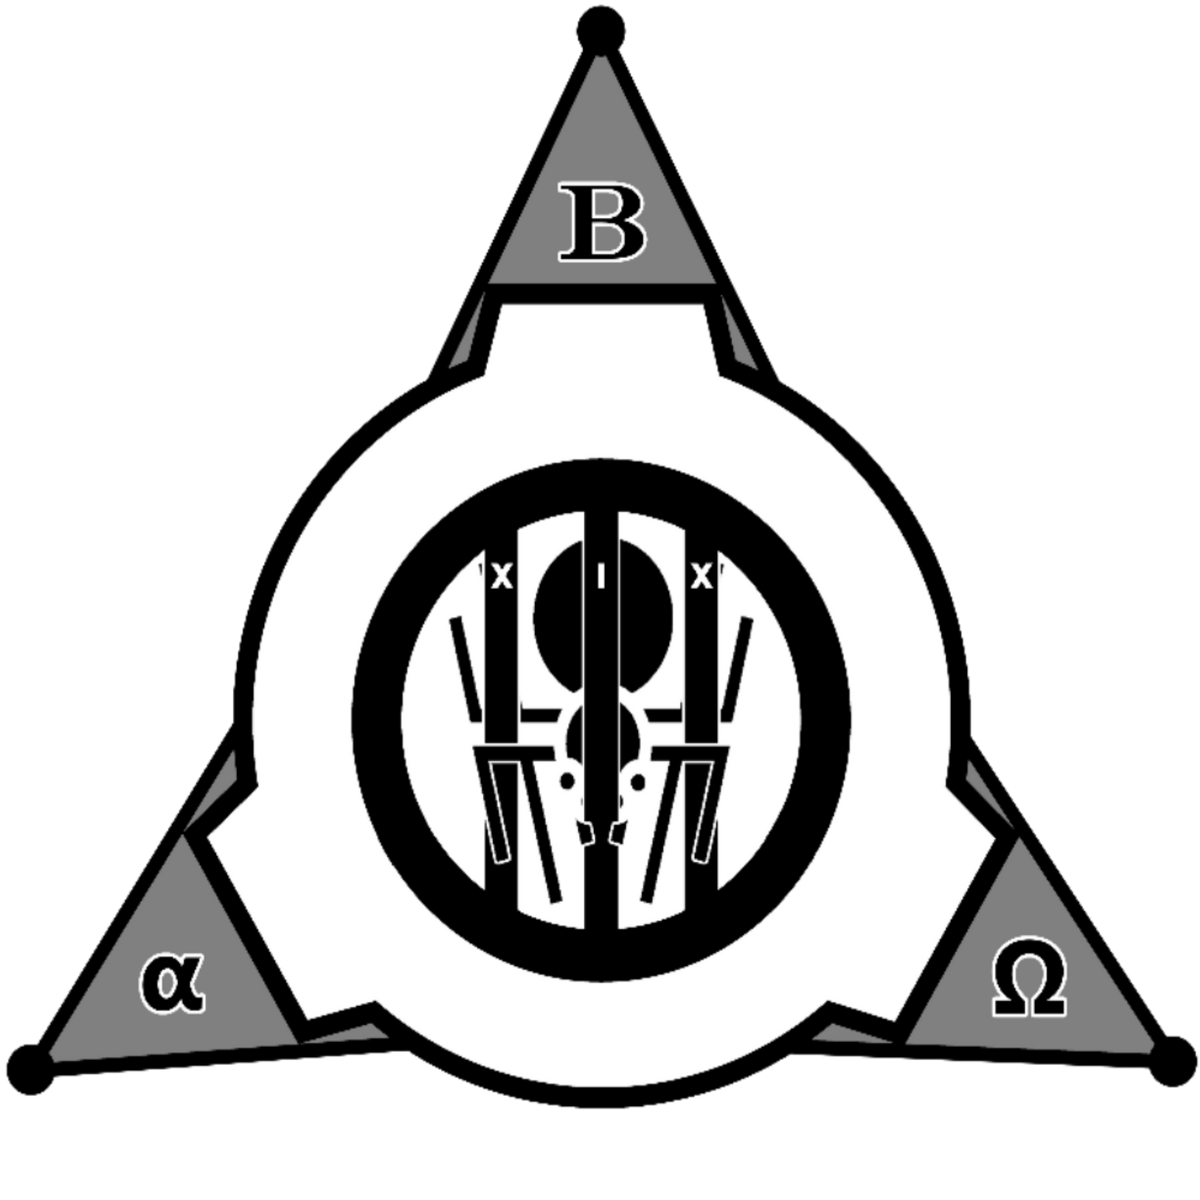 The SCP Foundation - Site-19 got dark today  Source: http